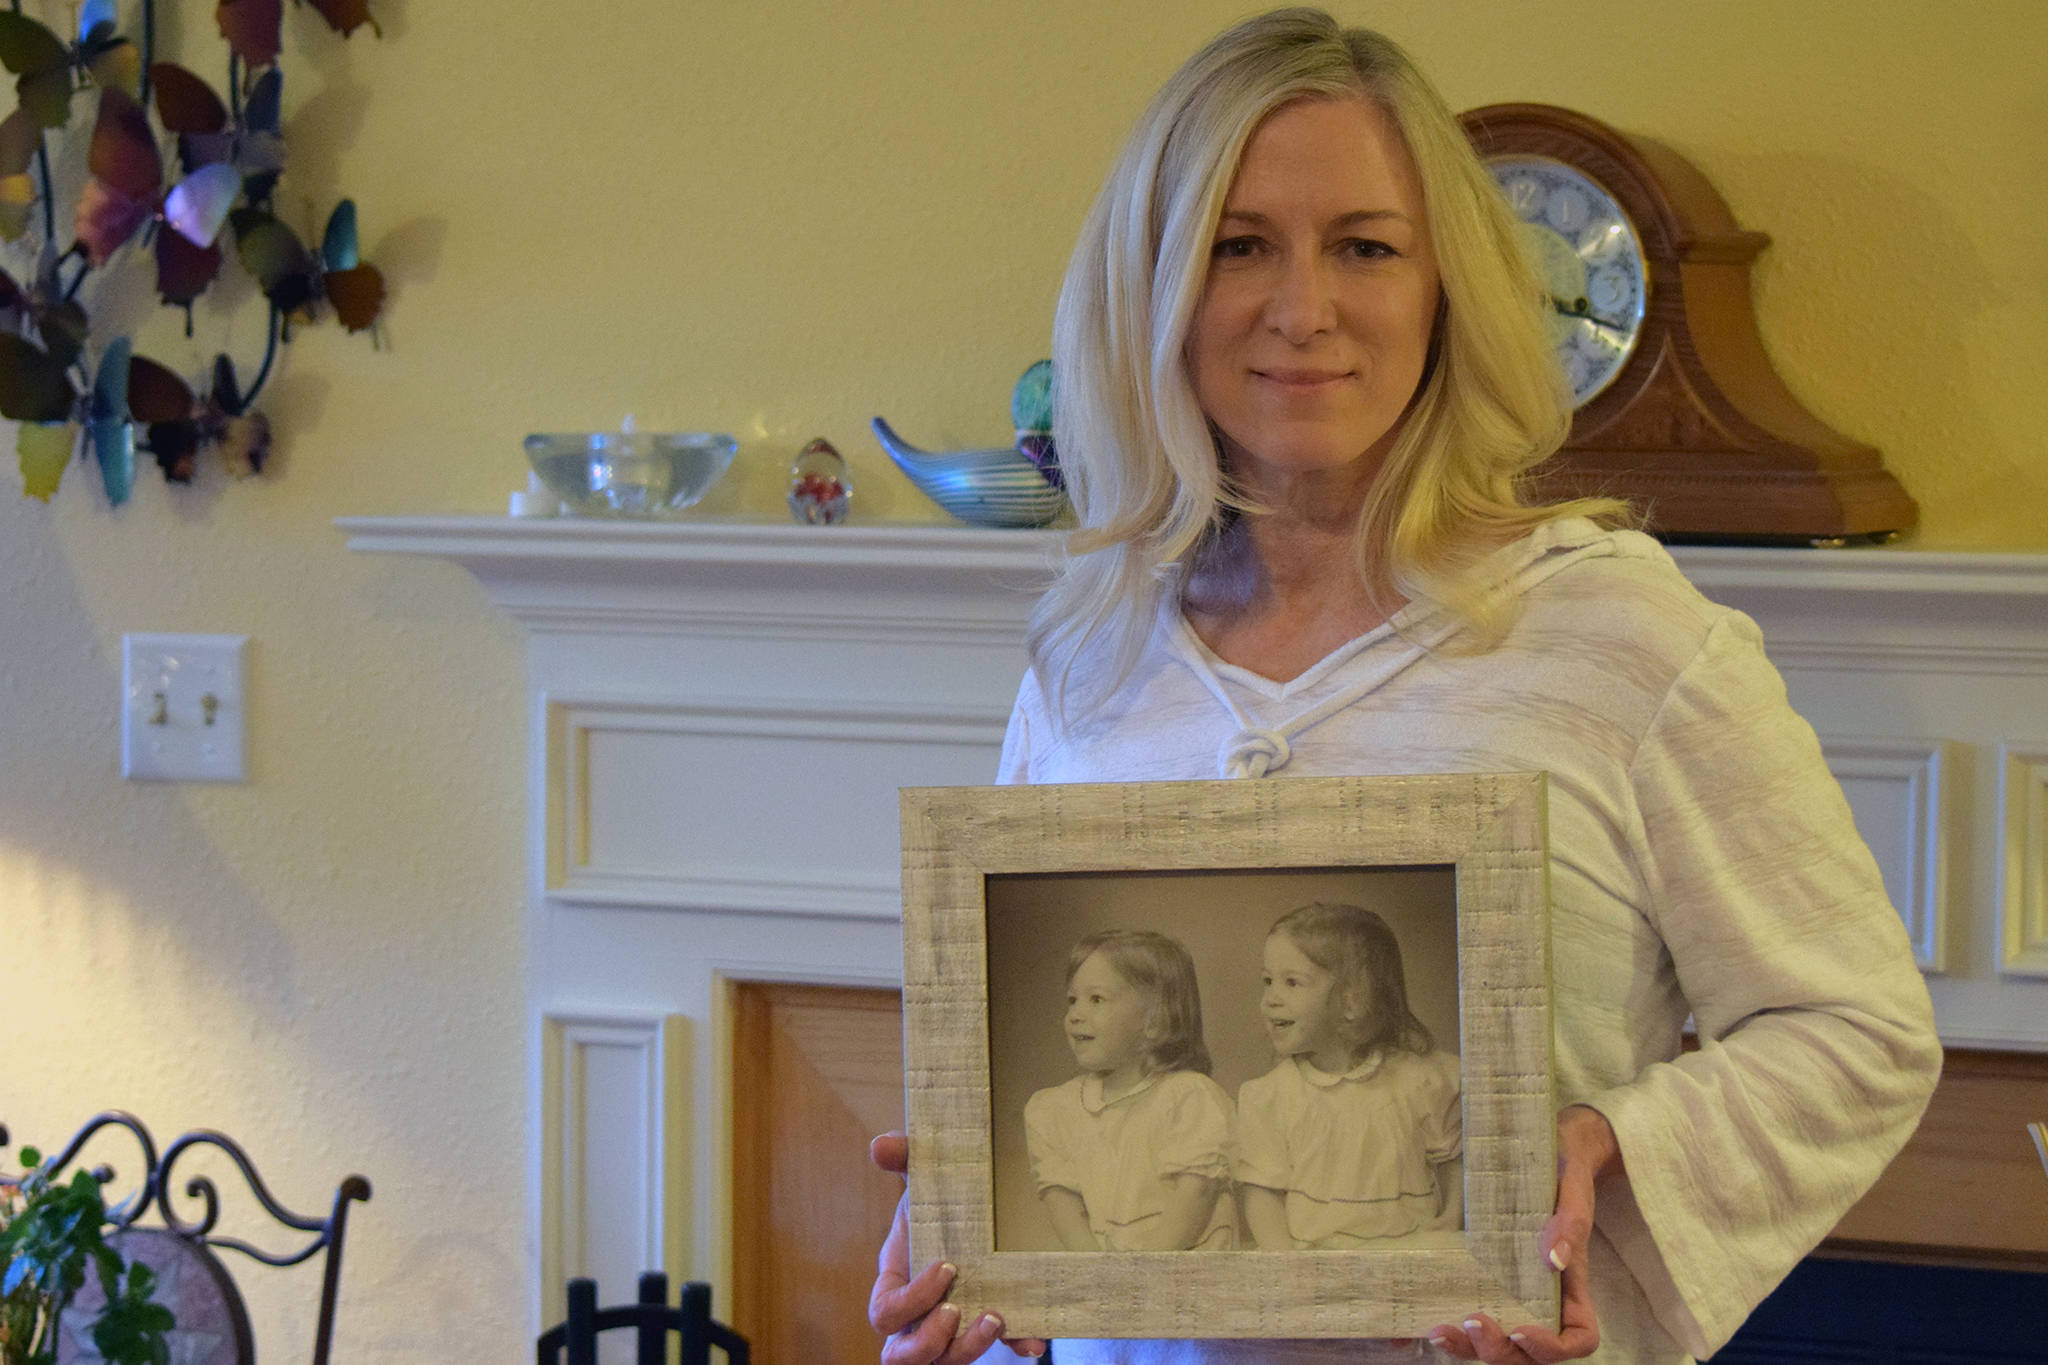 Brenda Bowers holds up a photo of herself and her then-sister Bonnie at Brenda’s Juneau home on May 31, 2019. (Ben Hohenstatt | Juneau Empire)